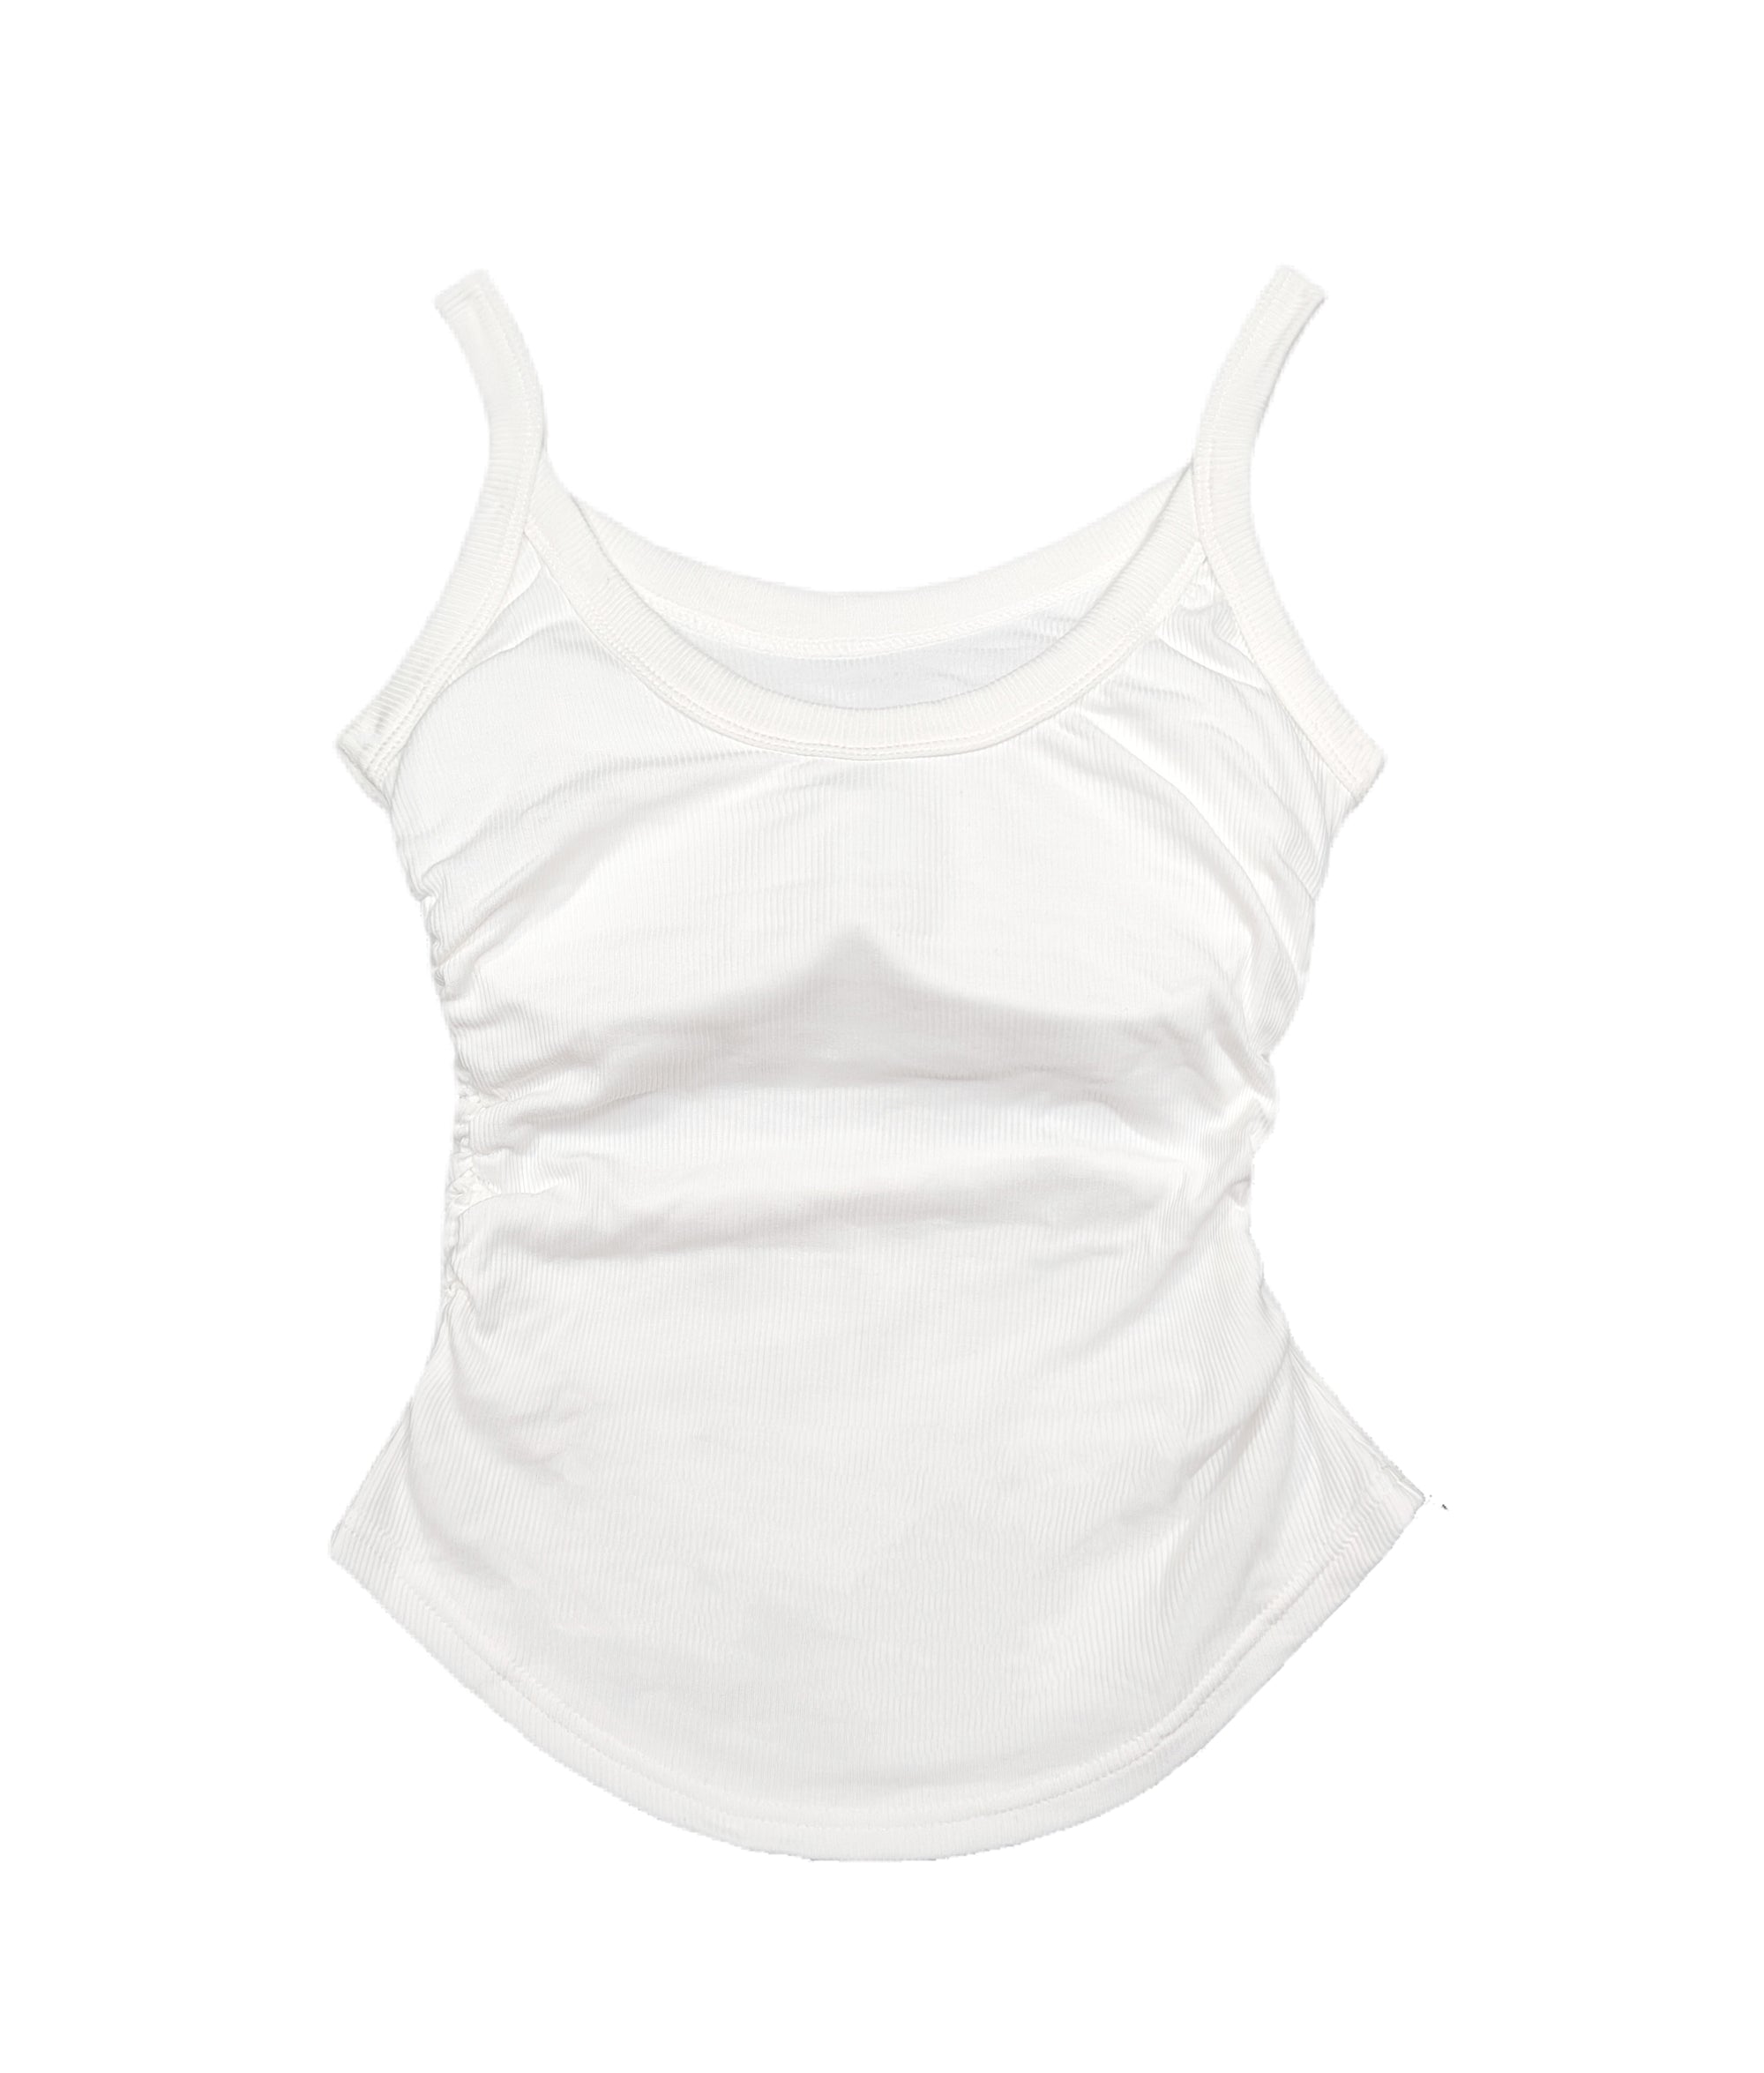 Thickened Fleece Padded Thermal Camisole with Waistband